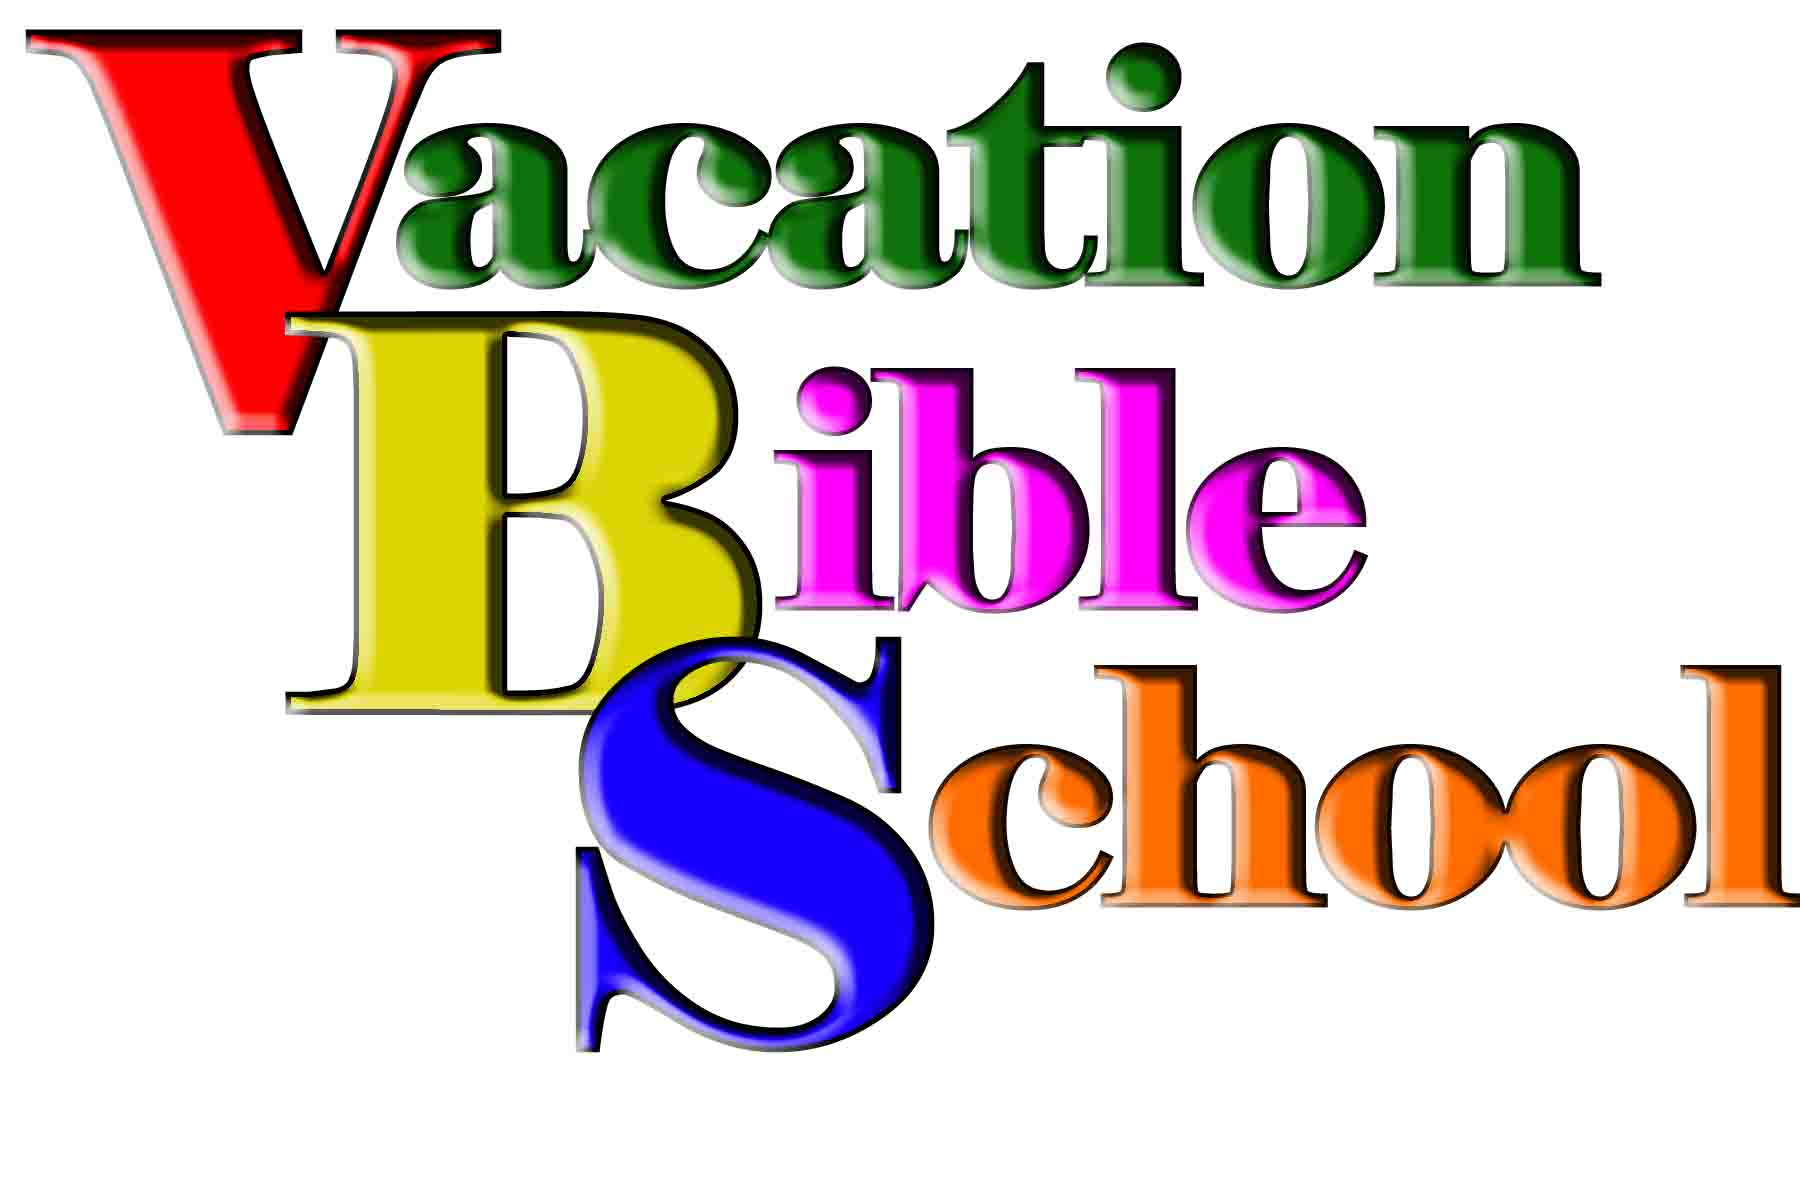 Png Royalty Free For Vacation Bible School - Rr Collections - Free Printable Vacation Bible School Materials - Free Printable Download